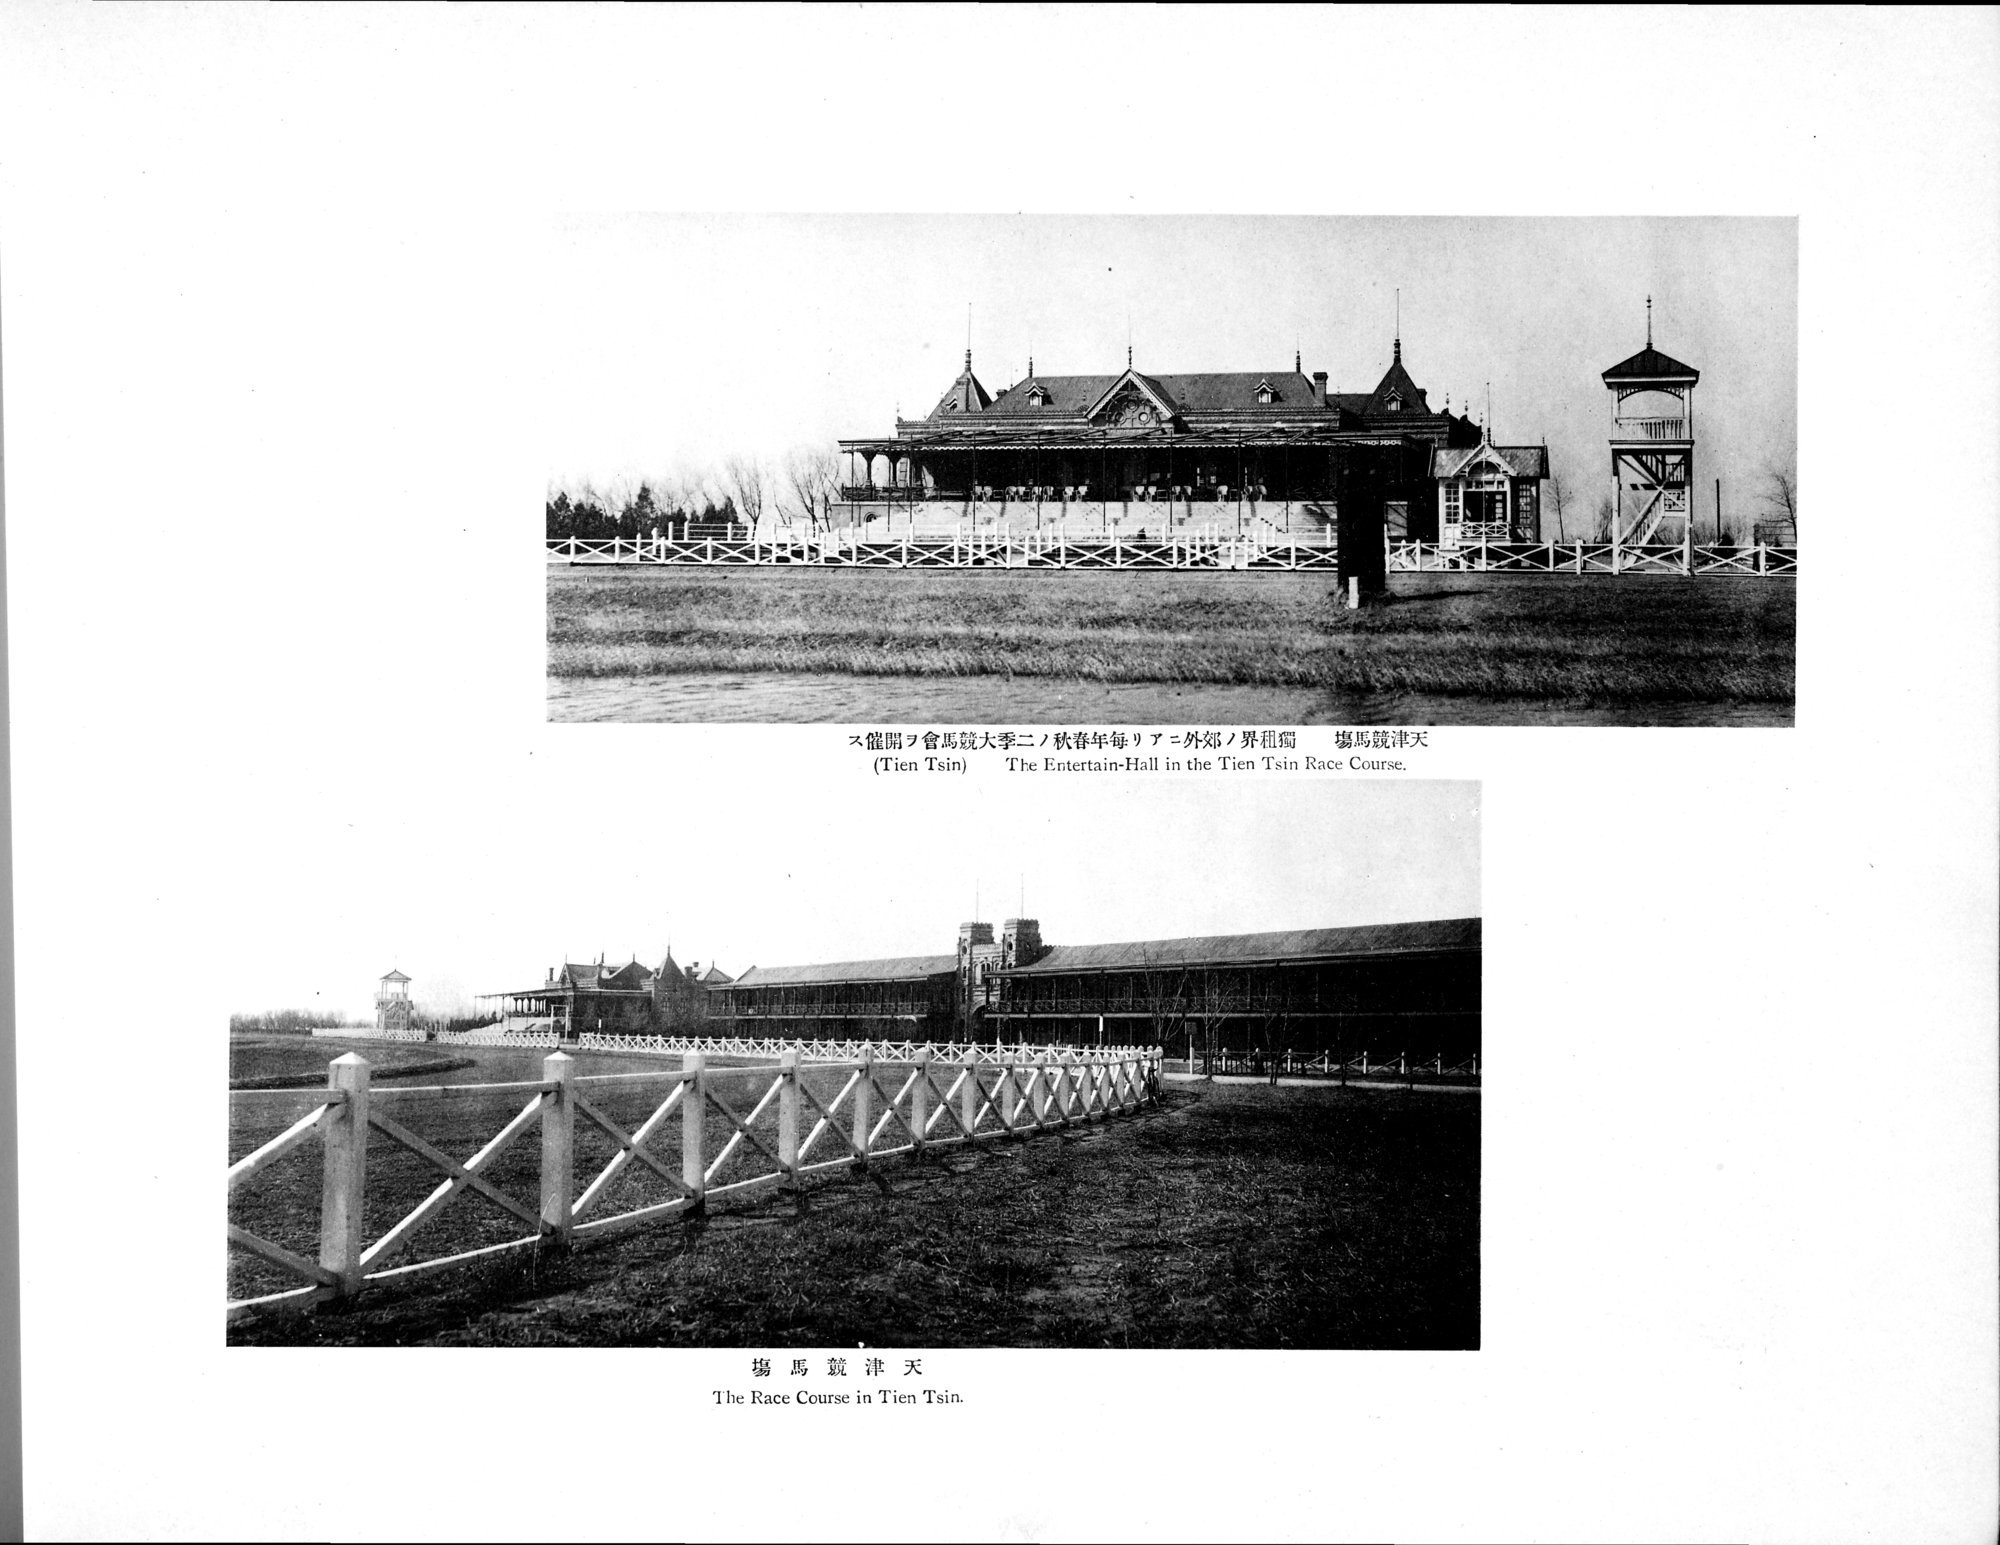 Views and Custom of North China : vol.1 / Page 29 (Grayscale High Resolution Image)